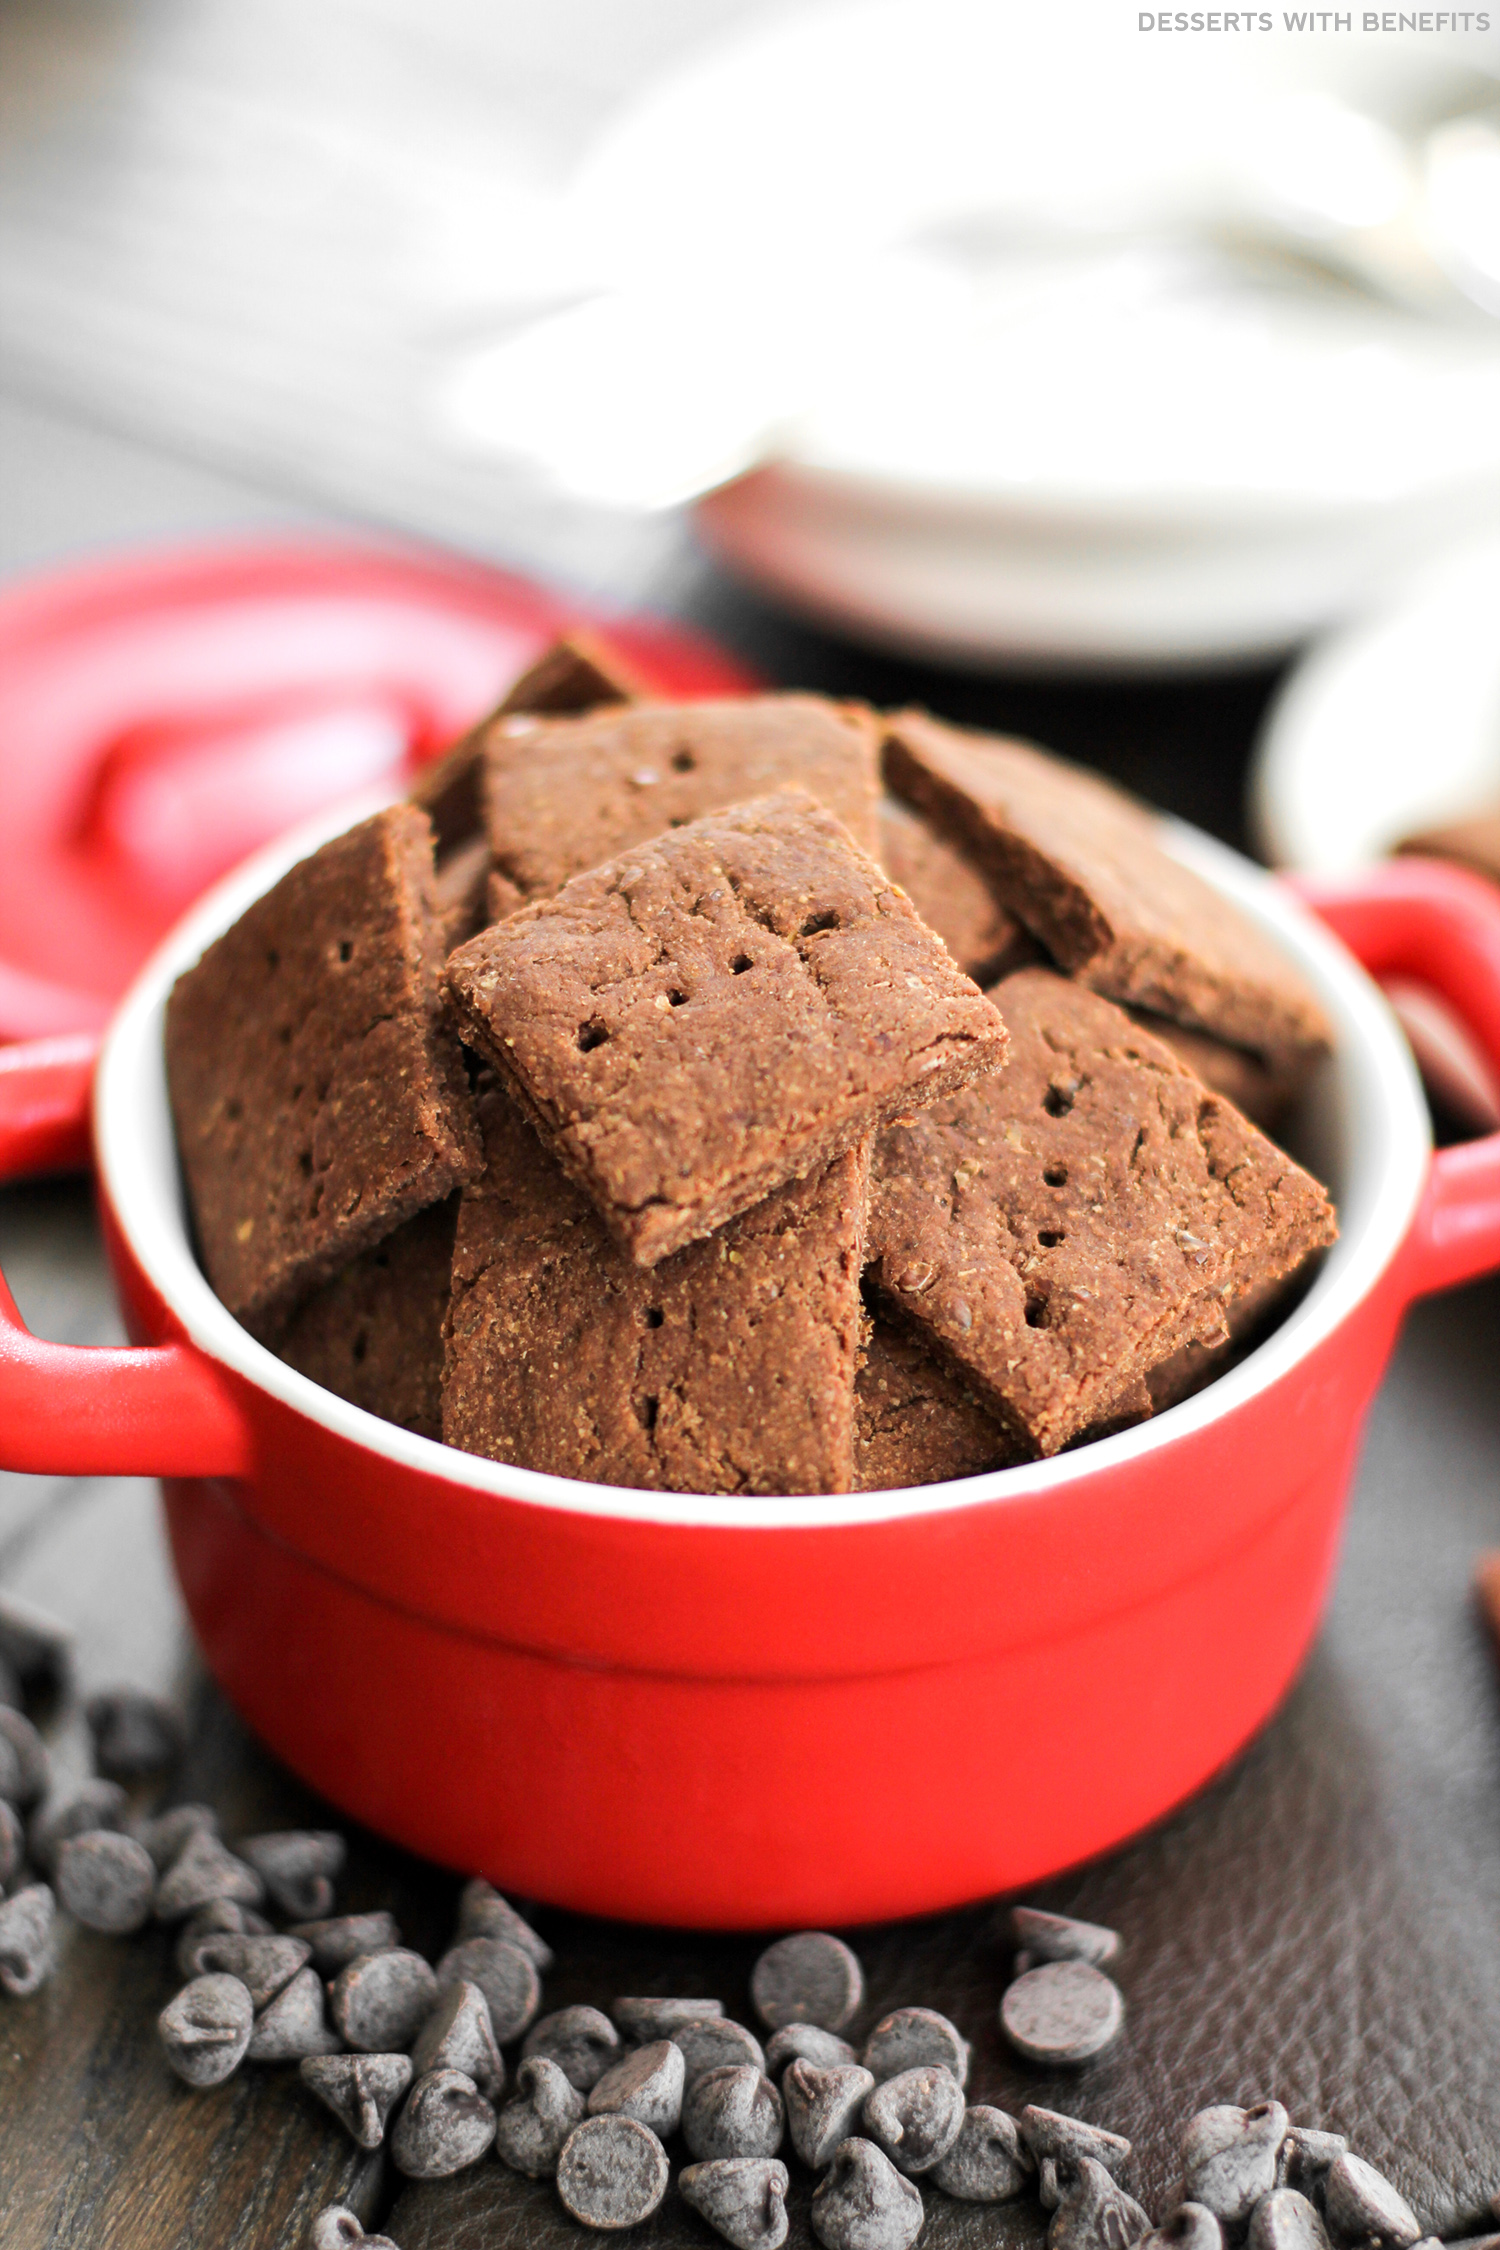 Desserts With Benefits Healthy Chocolate Flax Crackers Refined Sugar Free Low Fat High